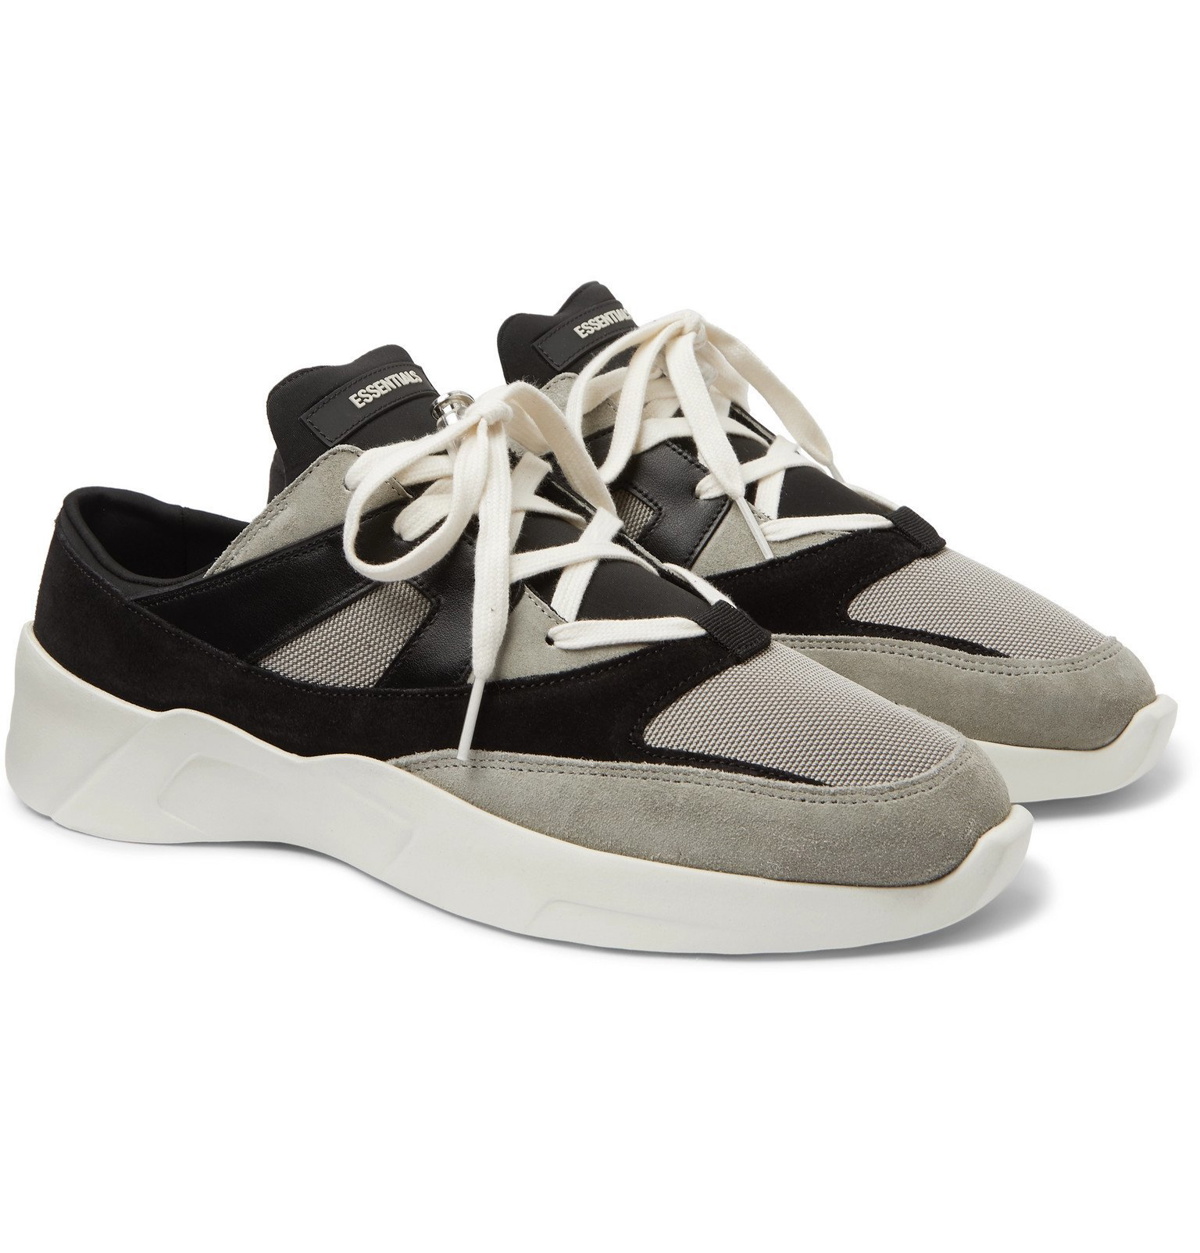 tildele elefant i live Fear Of God Essentials - Mesh, Suede and Leather Backless Sneakers - Gray  Fear Of God Essentials